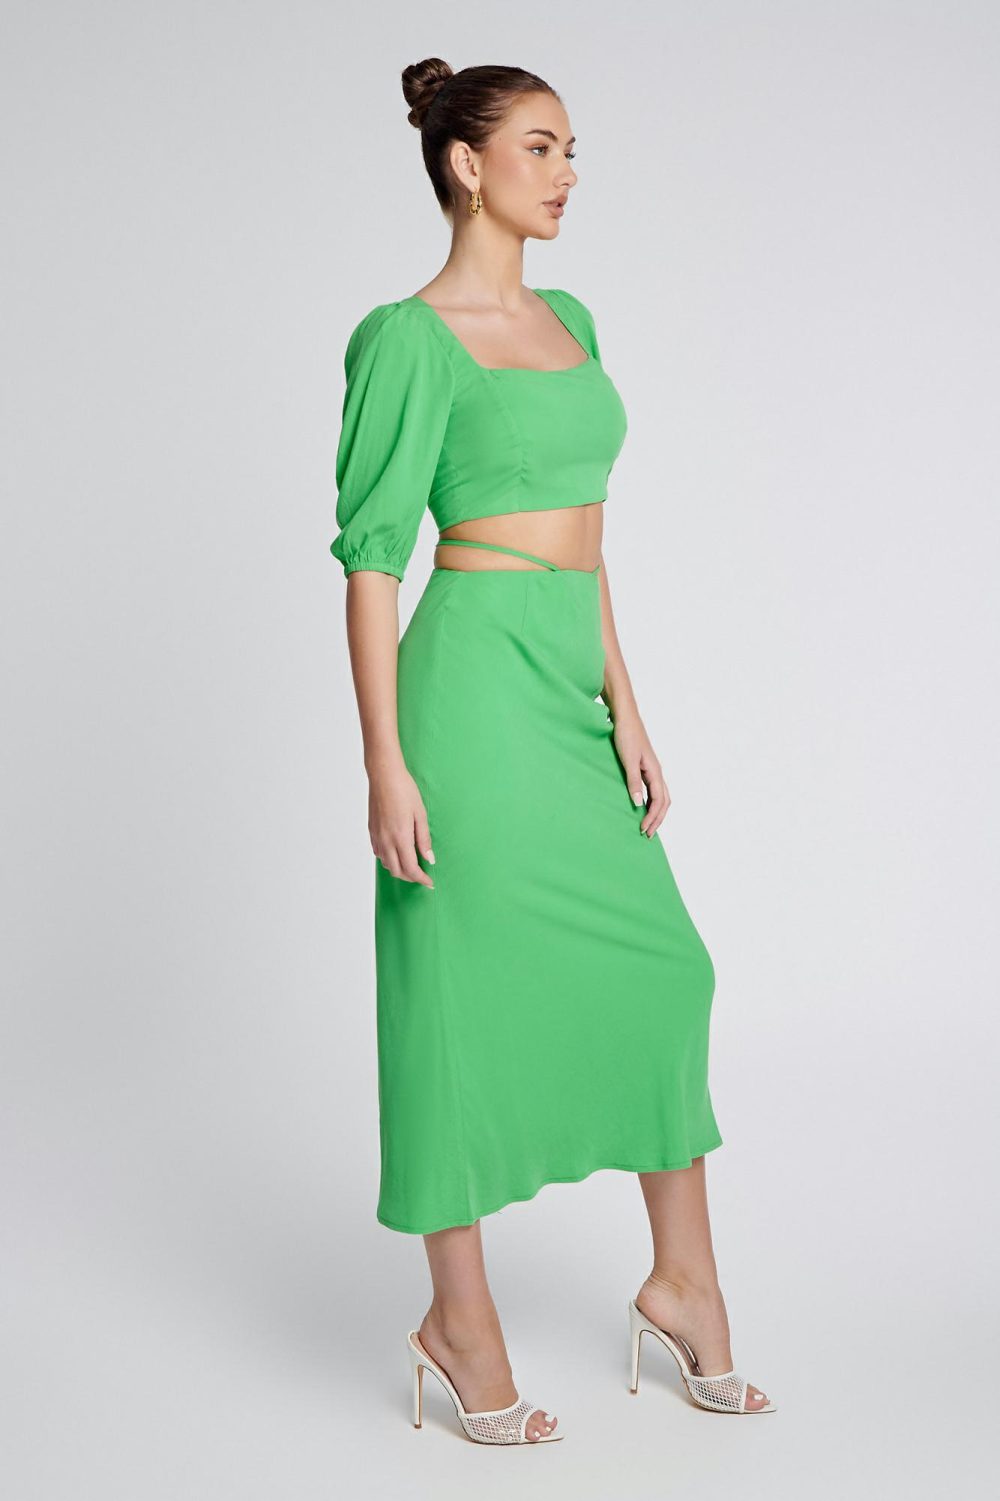 Ladies Top Colour is Green